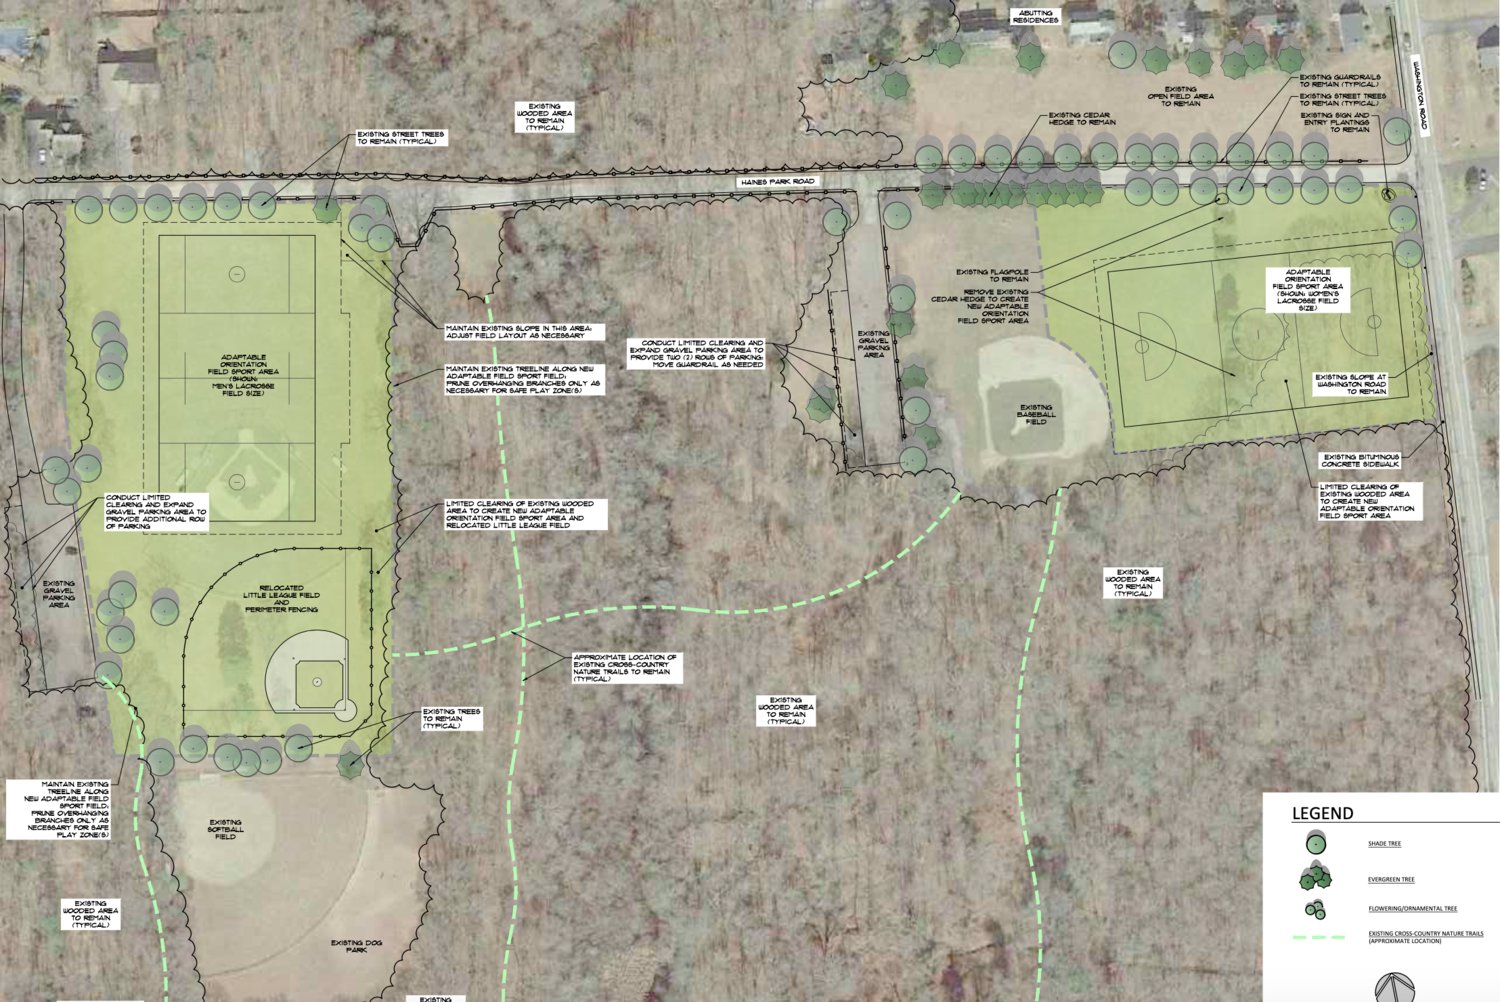 This plan shows the reconfiguration of athletic fields at Haines Park in Barrington.